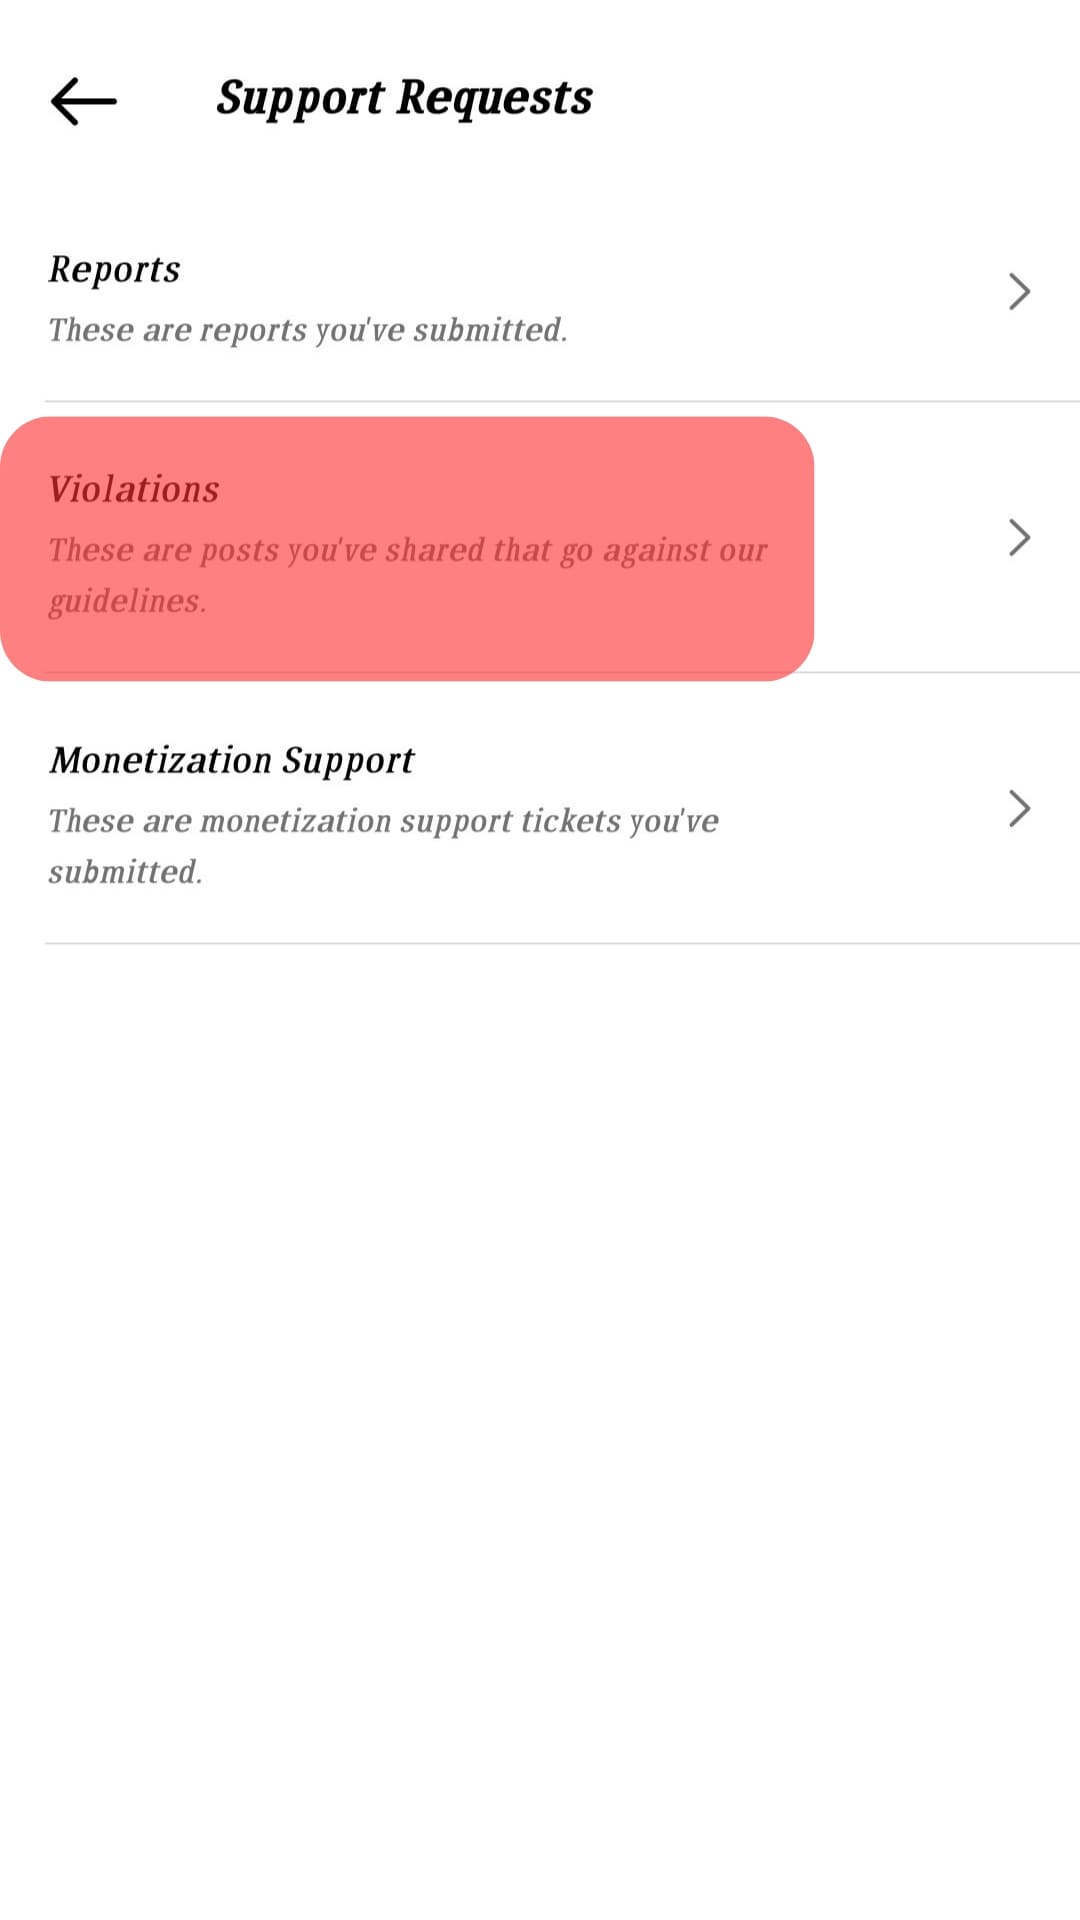 Tap On The Support Requests Tab And Click On Violations.